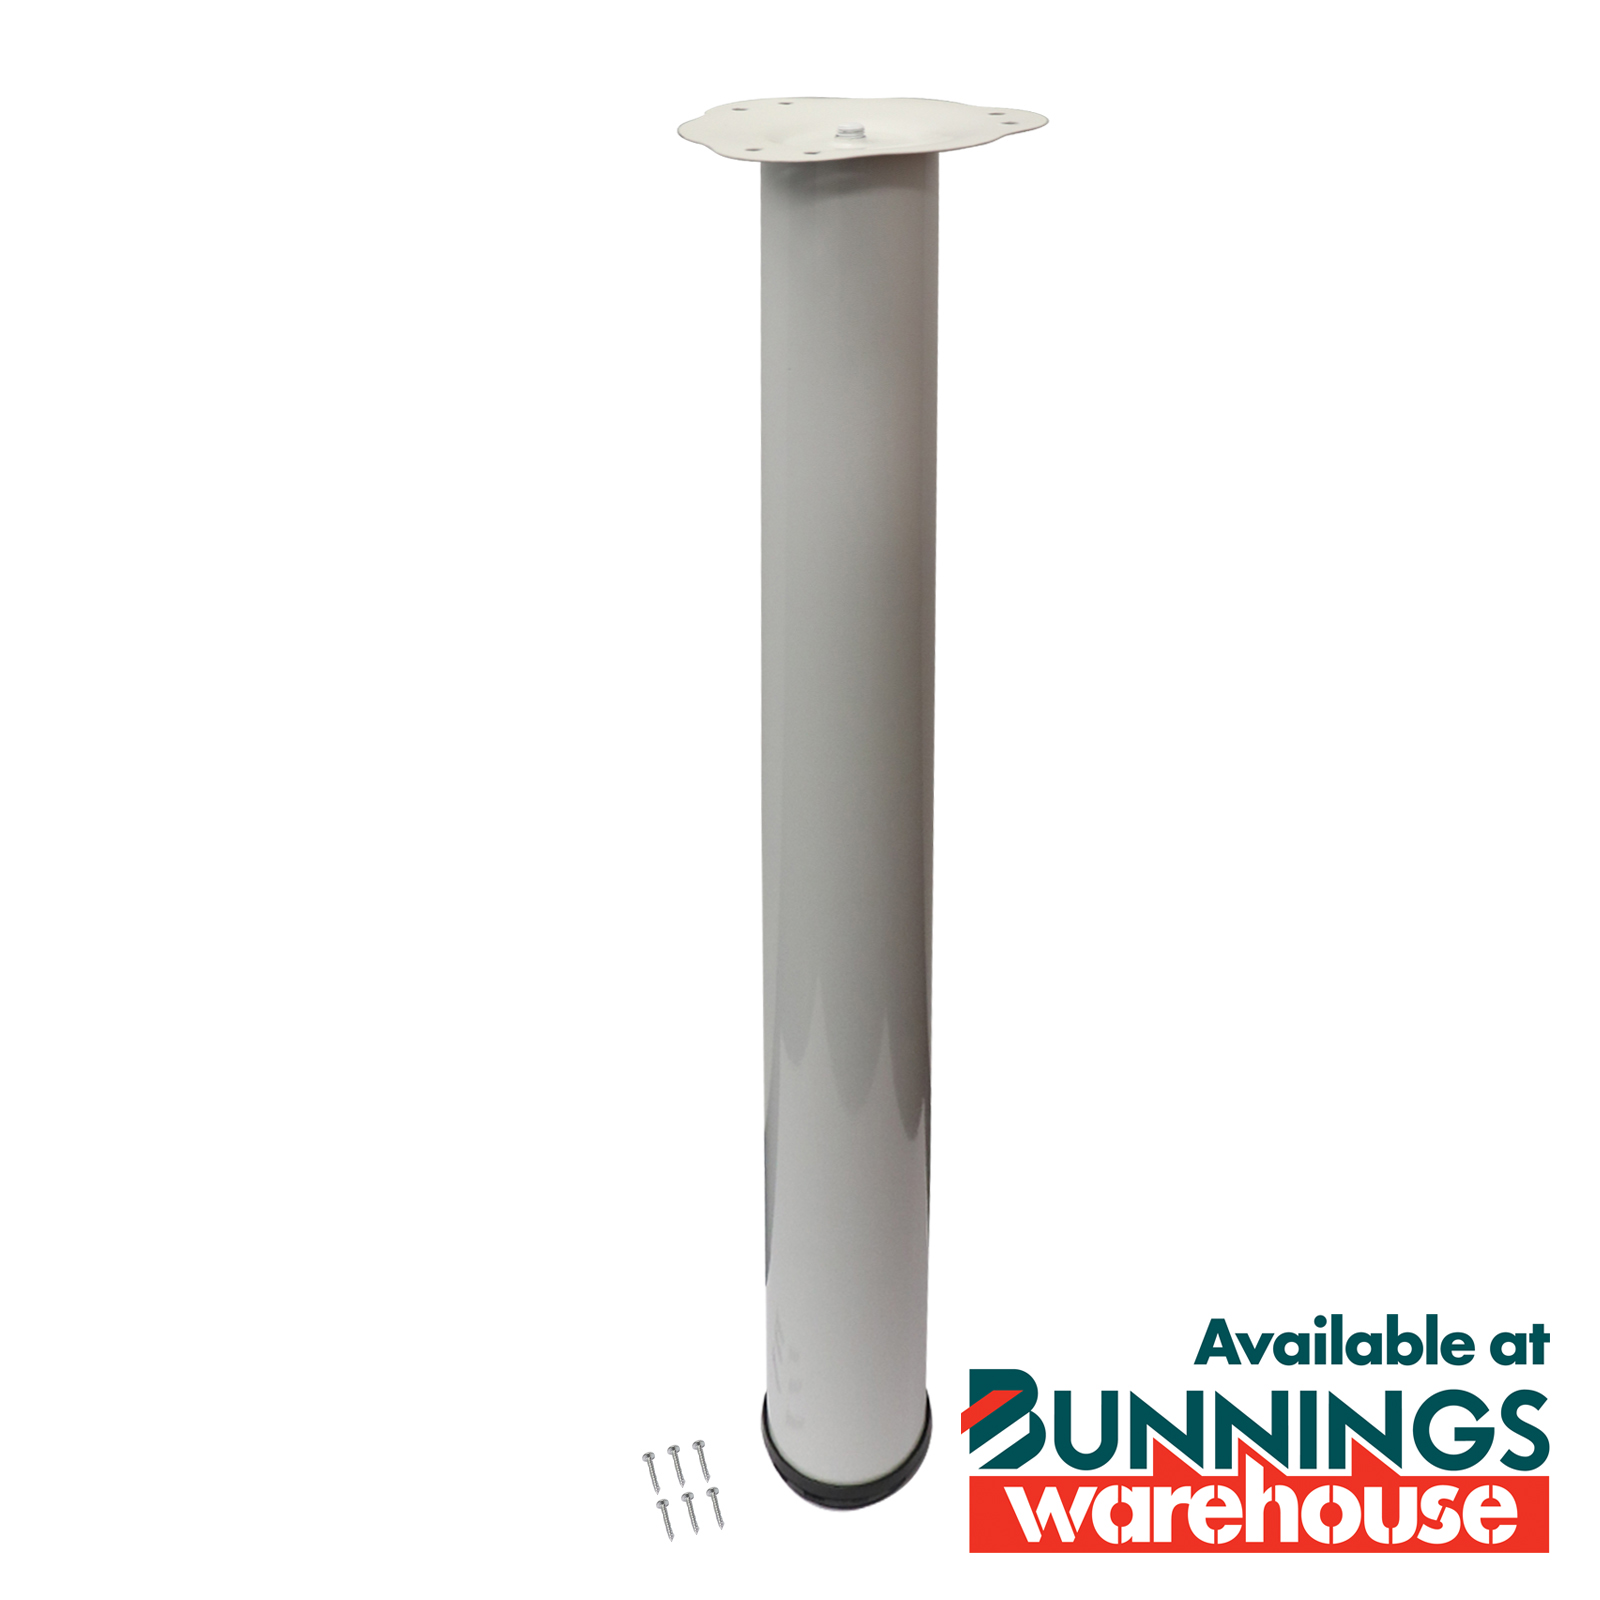 Adoored 60x710mm Adjustable White Table Leg